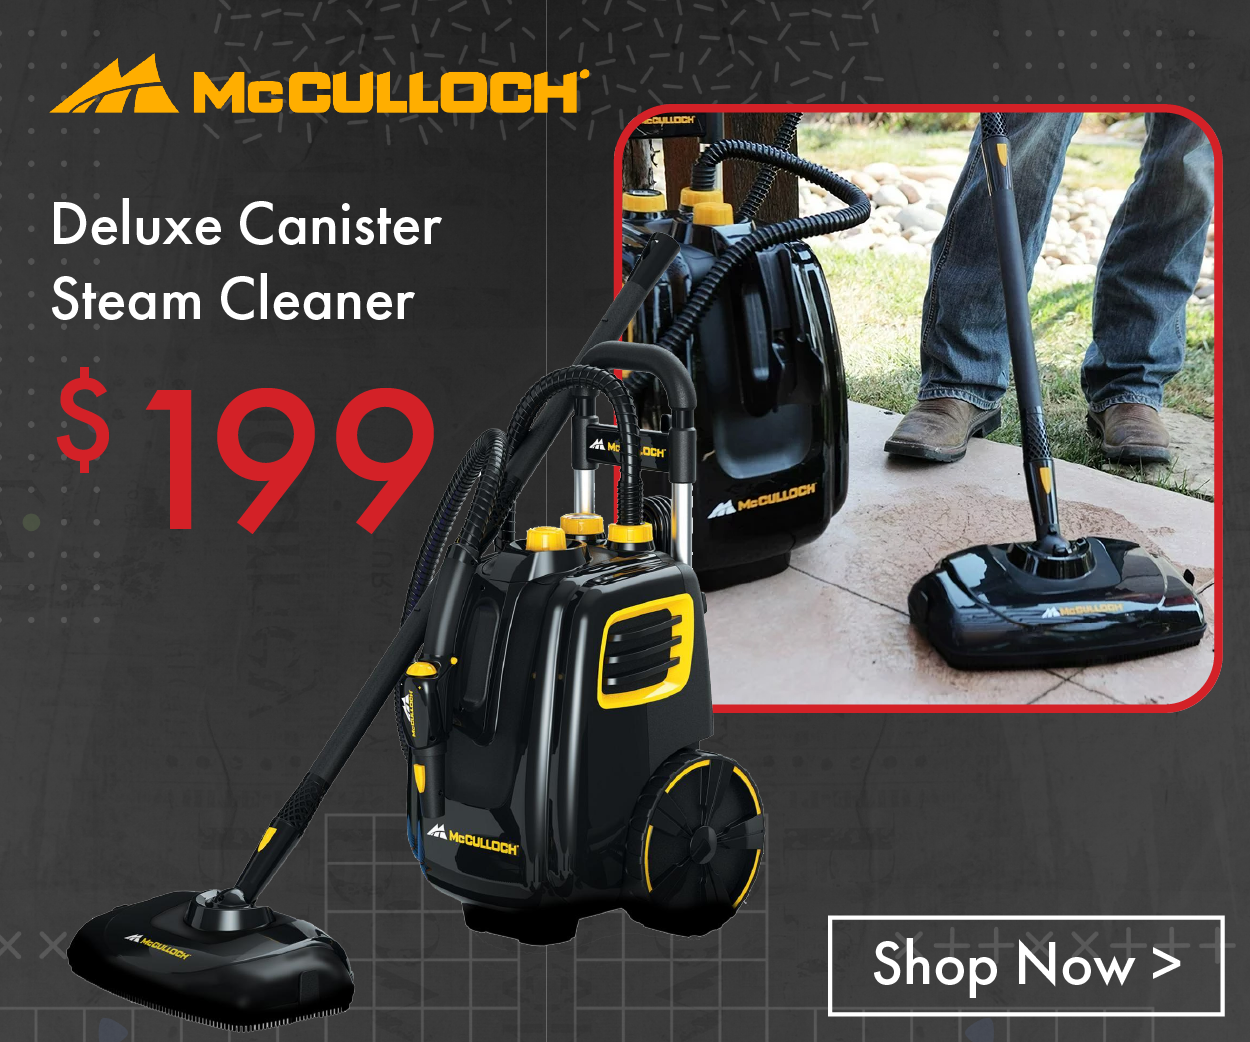 McCulloch Deluxe Canister Steam Cleaner only $199